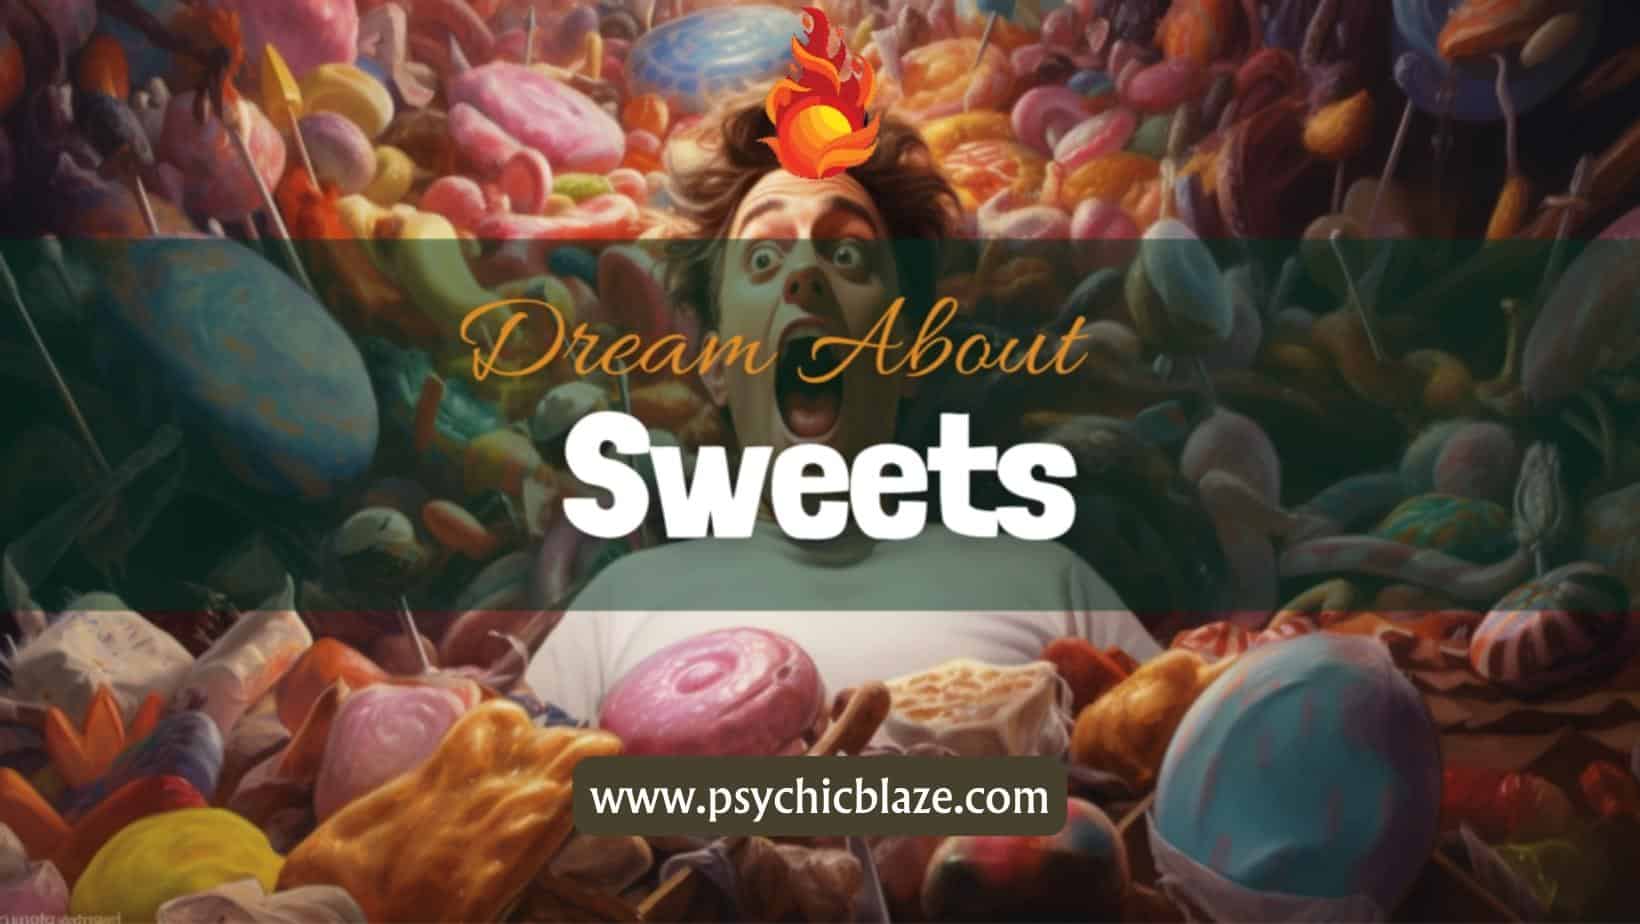 Dream about Sweets